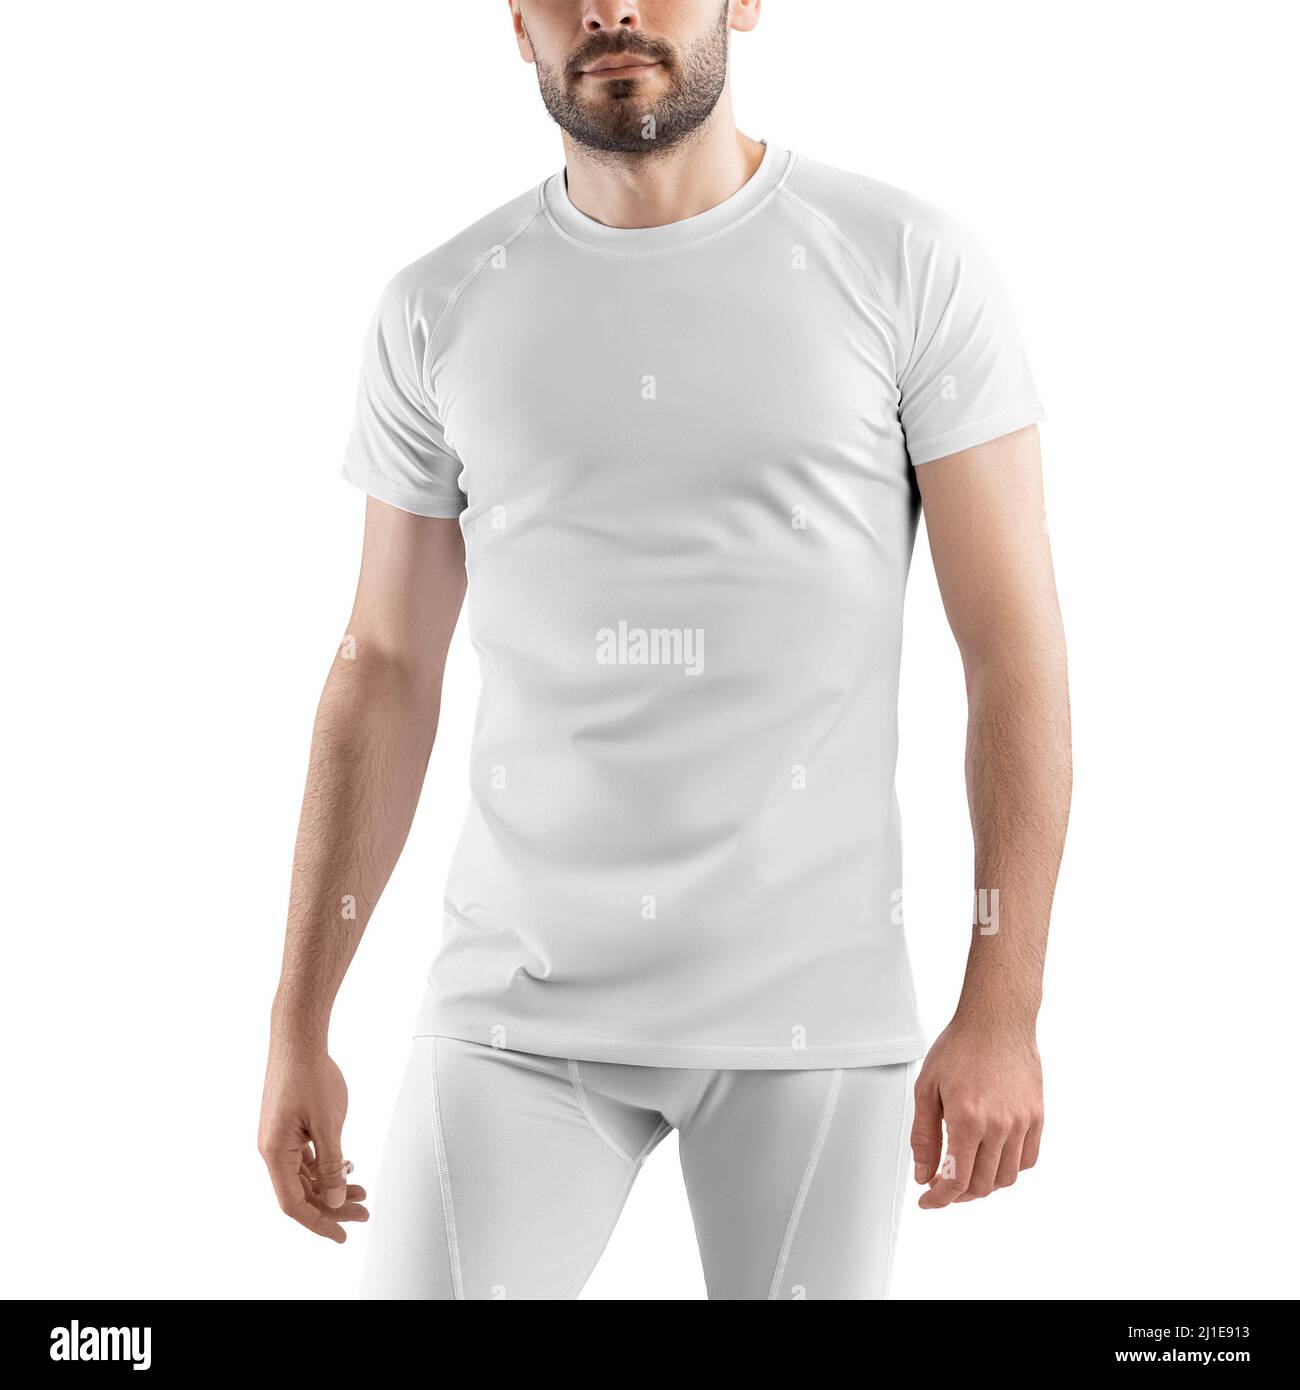 Mockup of a sporty men's white t-shirt and pants set. Sportswear template isolated on white background. Stock Photo